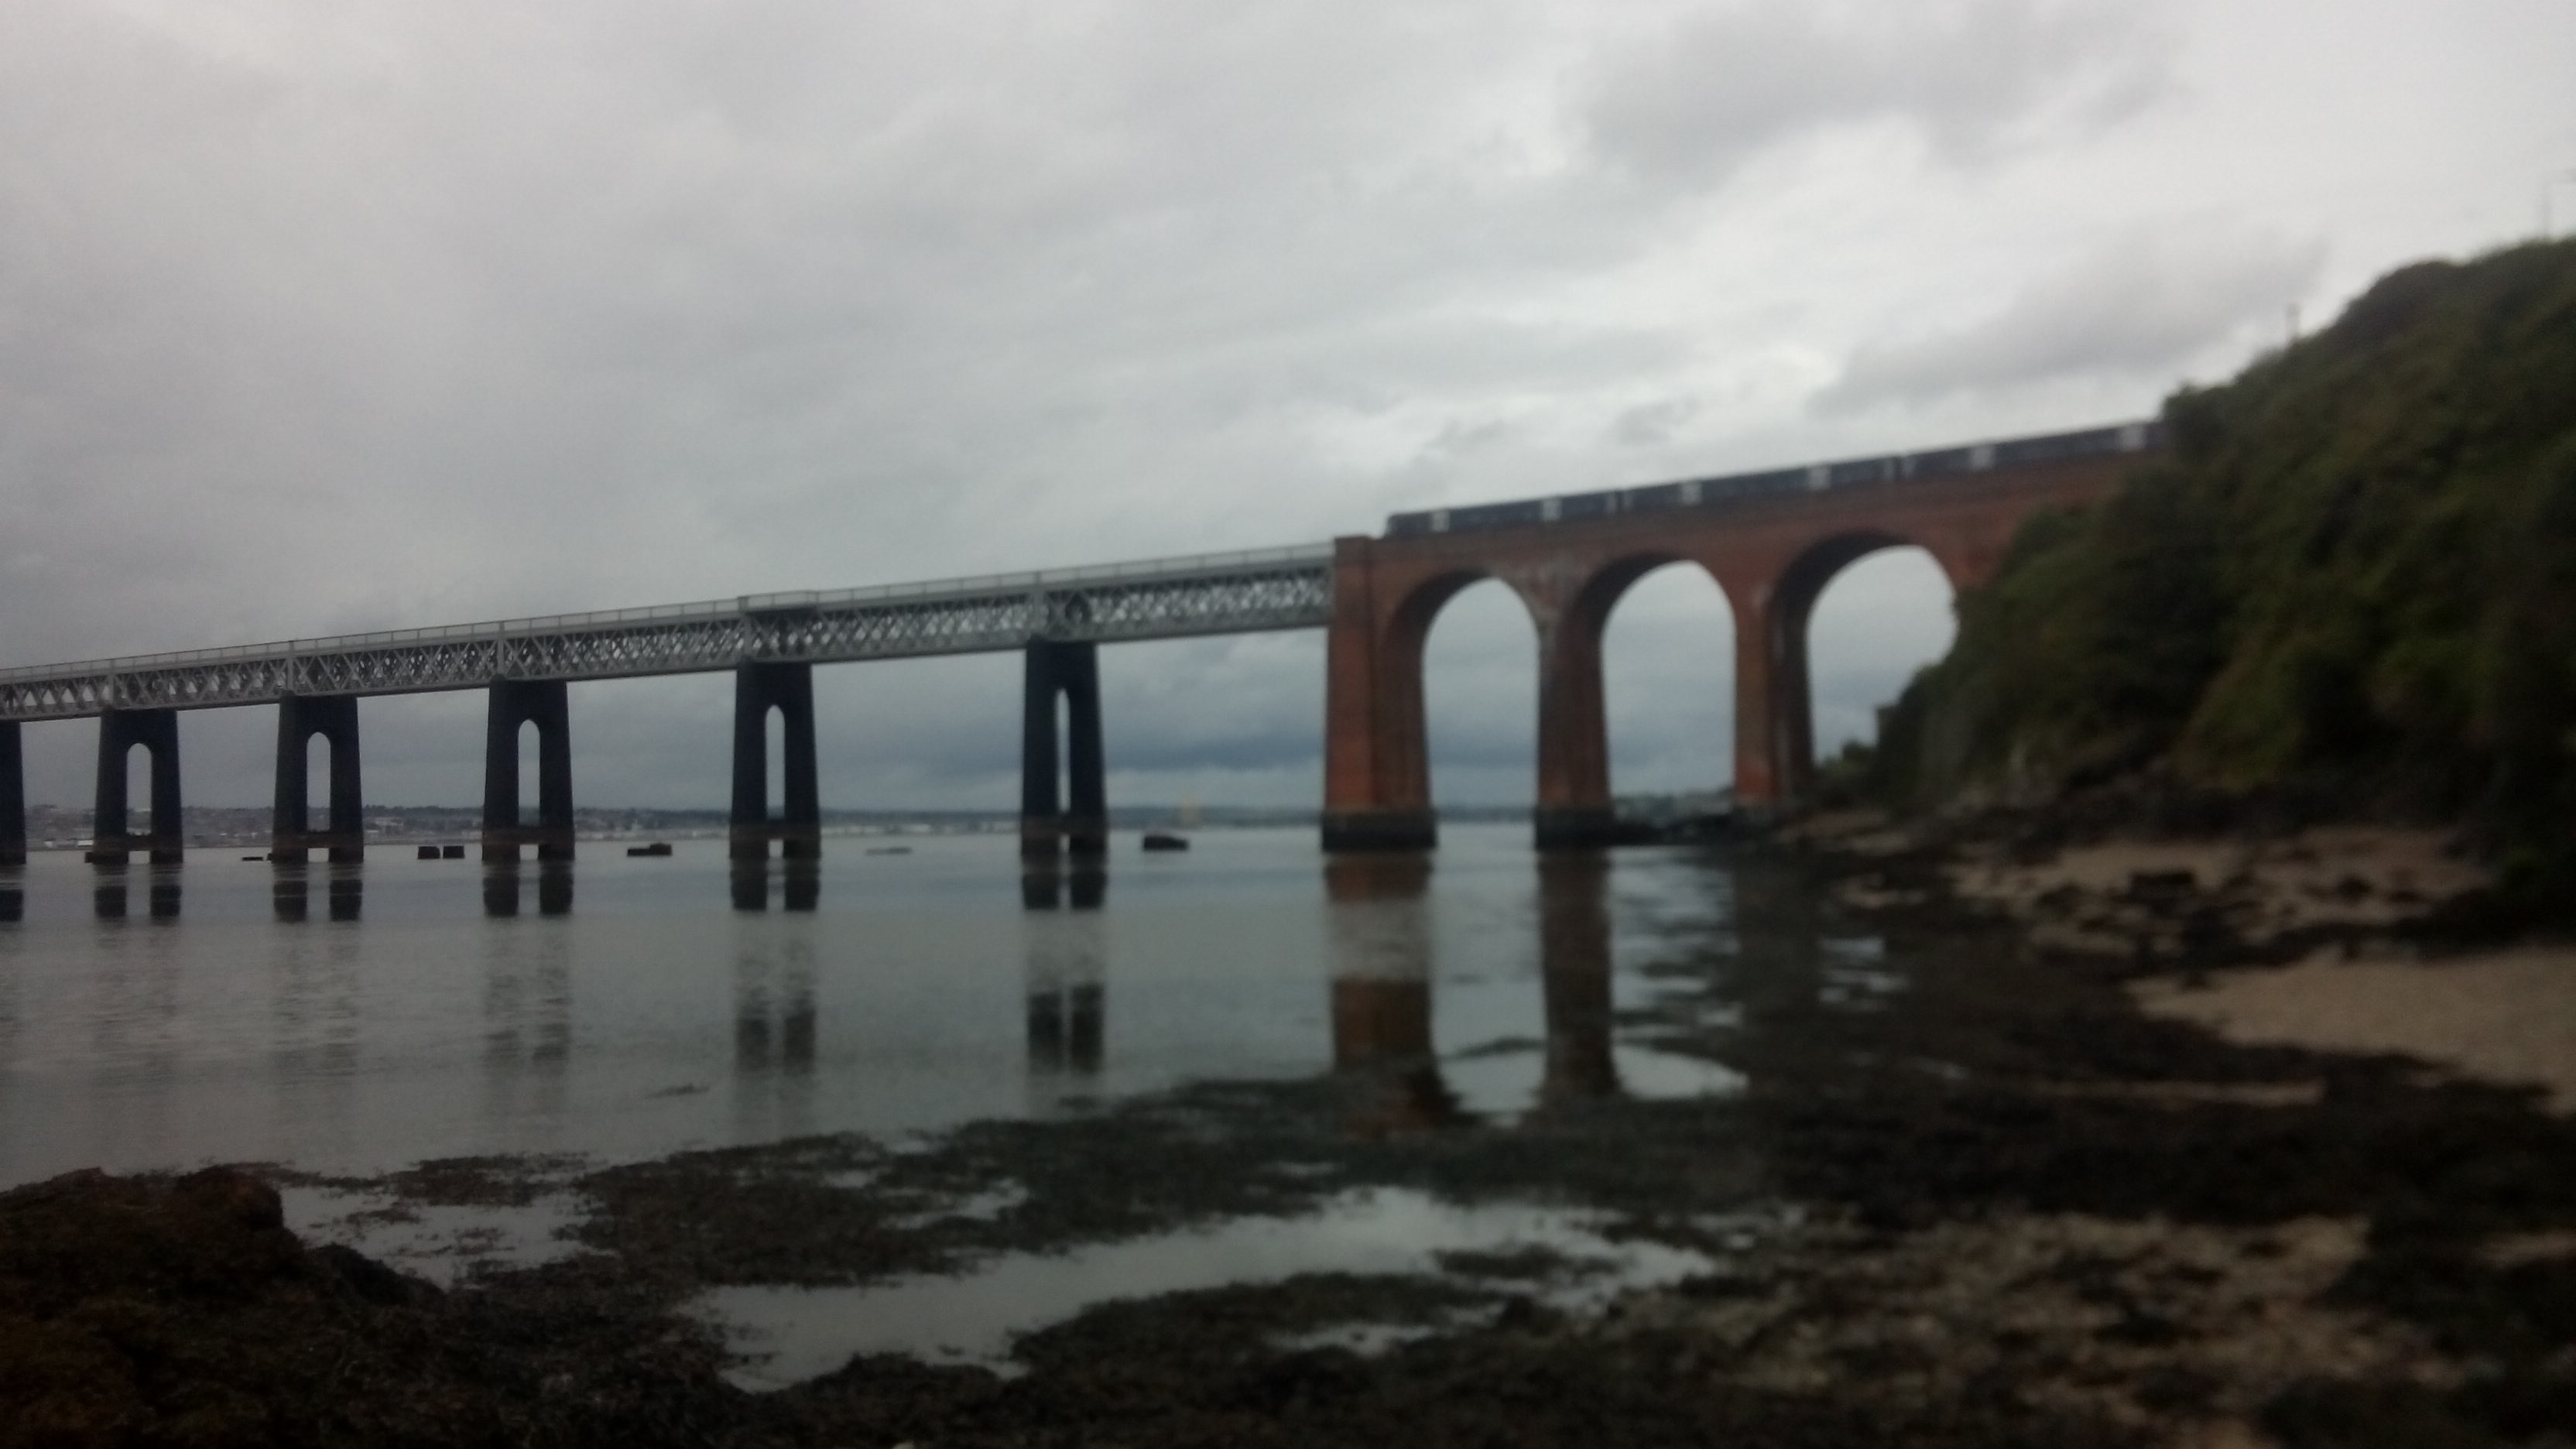 A brick and metal arched railway bridge passes over a rocky beach and water